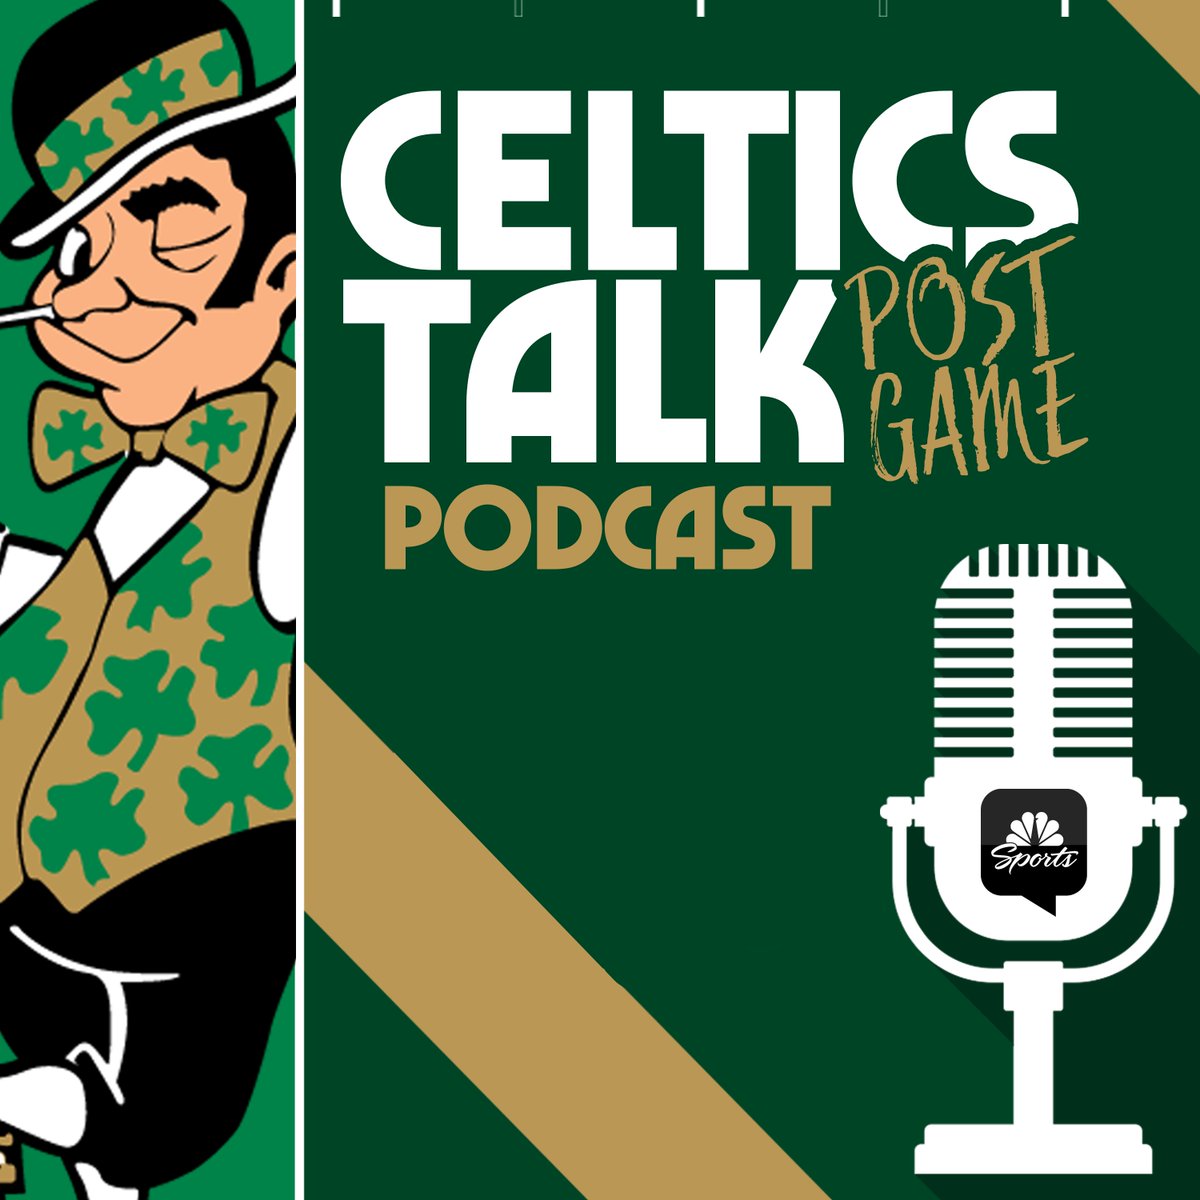 🚨 POSTGAME POD is live! @ChrisForsberg_ , @tvabby and our postgame crew react to a frustrating Game 2 for the C's against Miami 🍀 🎧: link.chtbl.com/RJkwuSSg 📺: youtu.be/gyMdvJS7Jbg